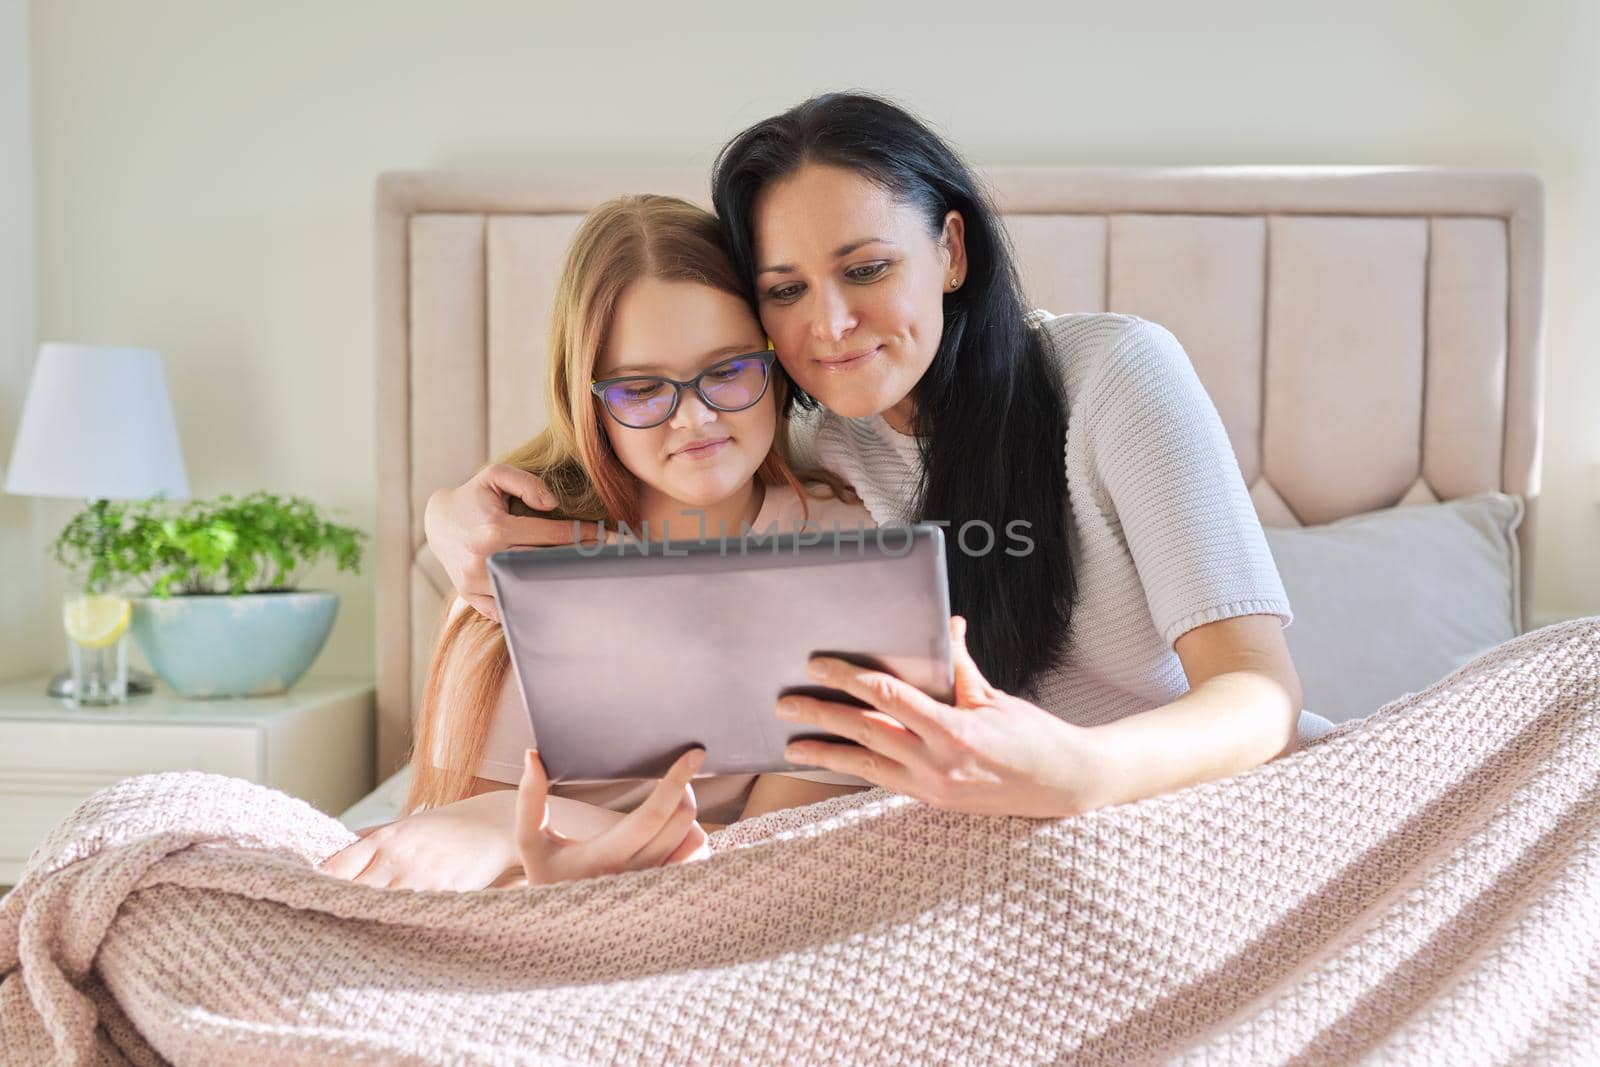 Happy mom and preteen daughter hugging together looking at screen of digital tablet, sitting at home in bed under blanket. Family, children, relationships, home, lifestyle, people concept